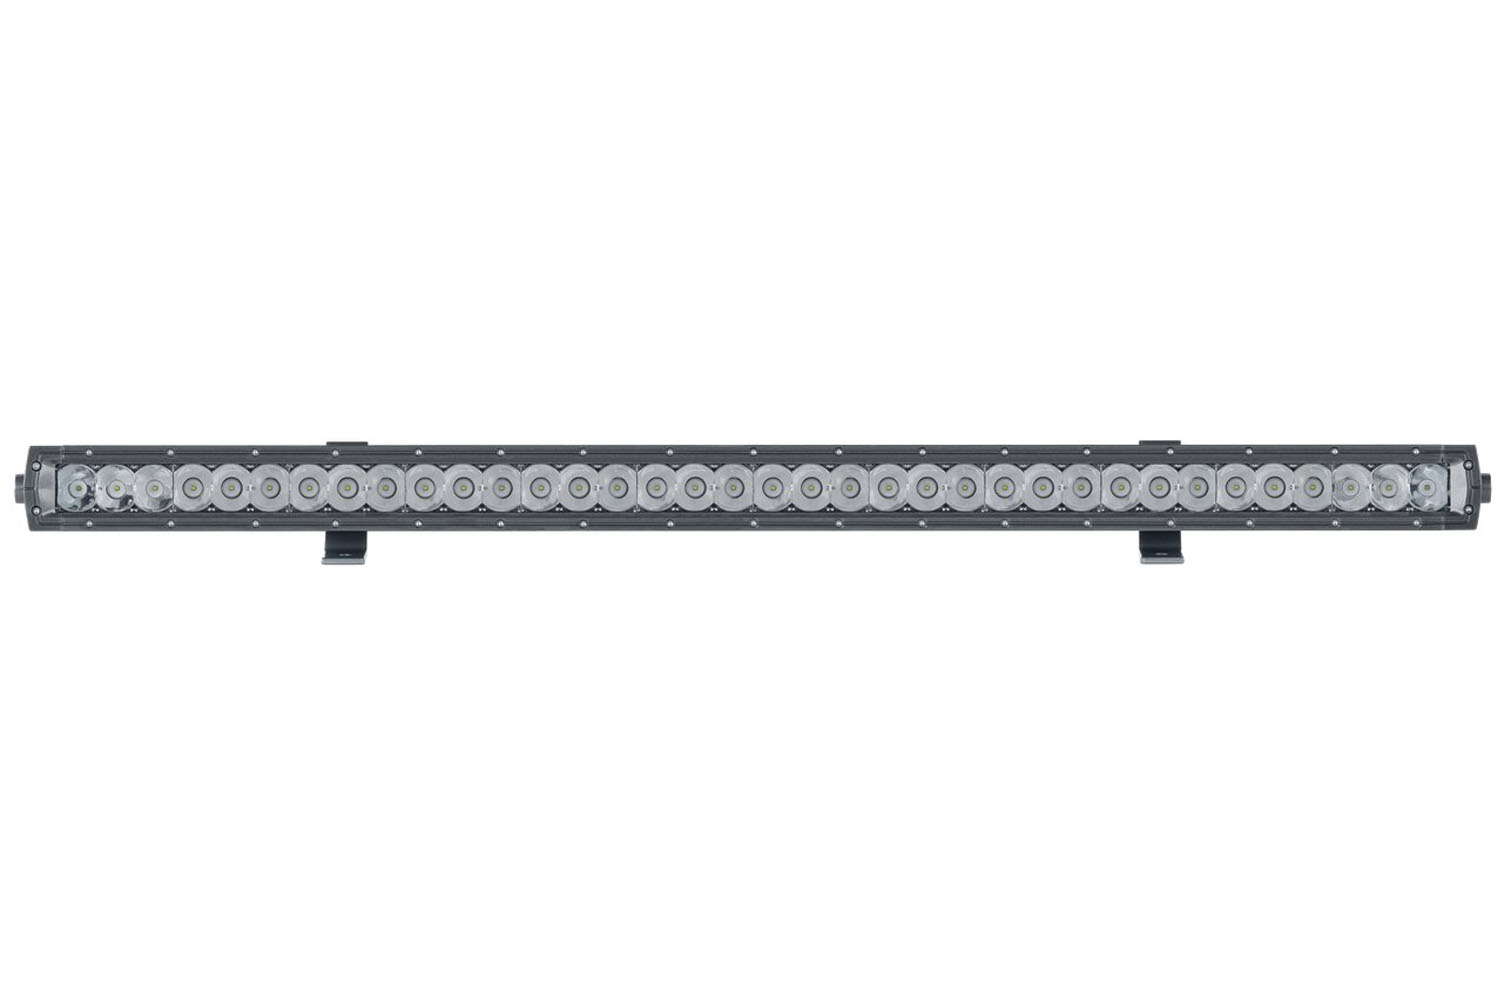 Night Saber LED Single Row Light Bar - 37" Questions & Answers